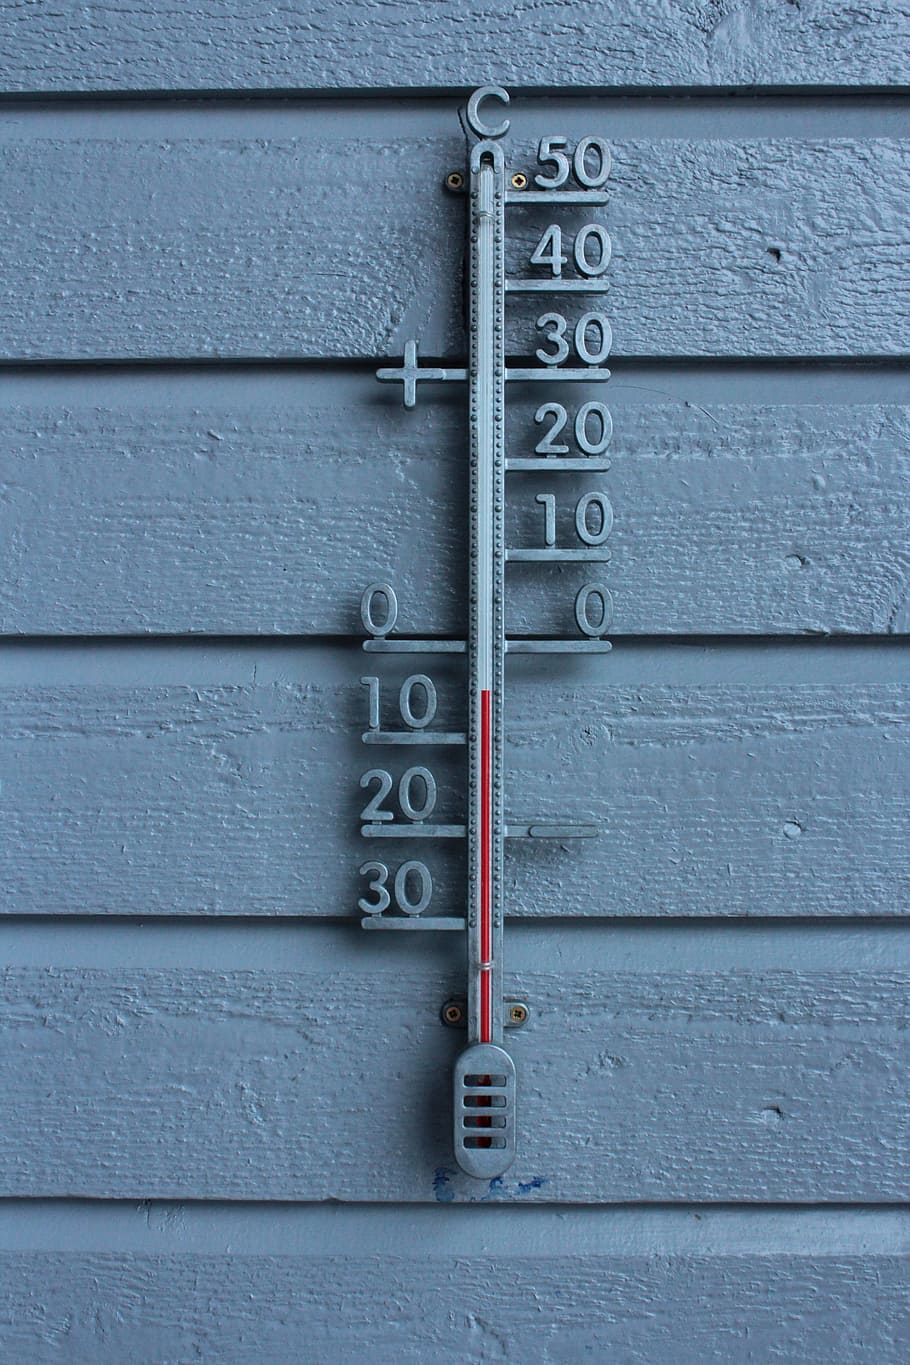 temperature decor, Thermometer, Winter, Frost, Vintage, cold, norway, longyear, svalbard, door